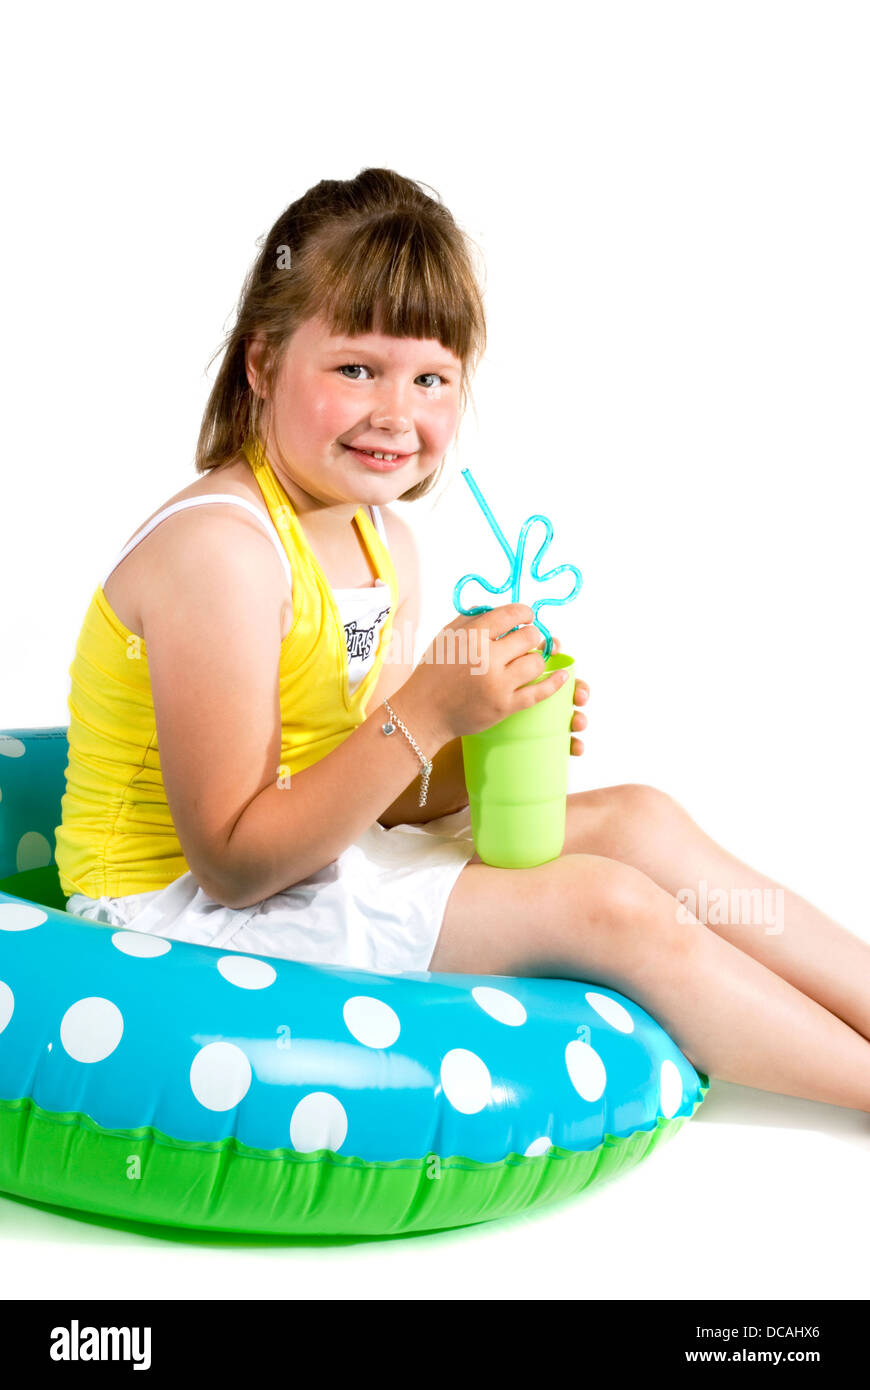 Girl at swimming pool Cut Out Stock Images & Pictures - Alamy